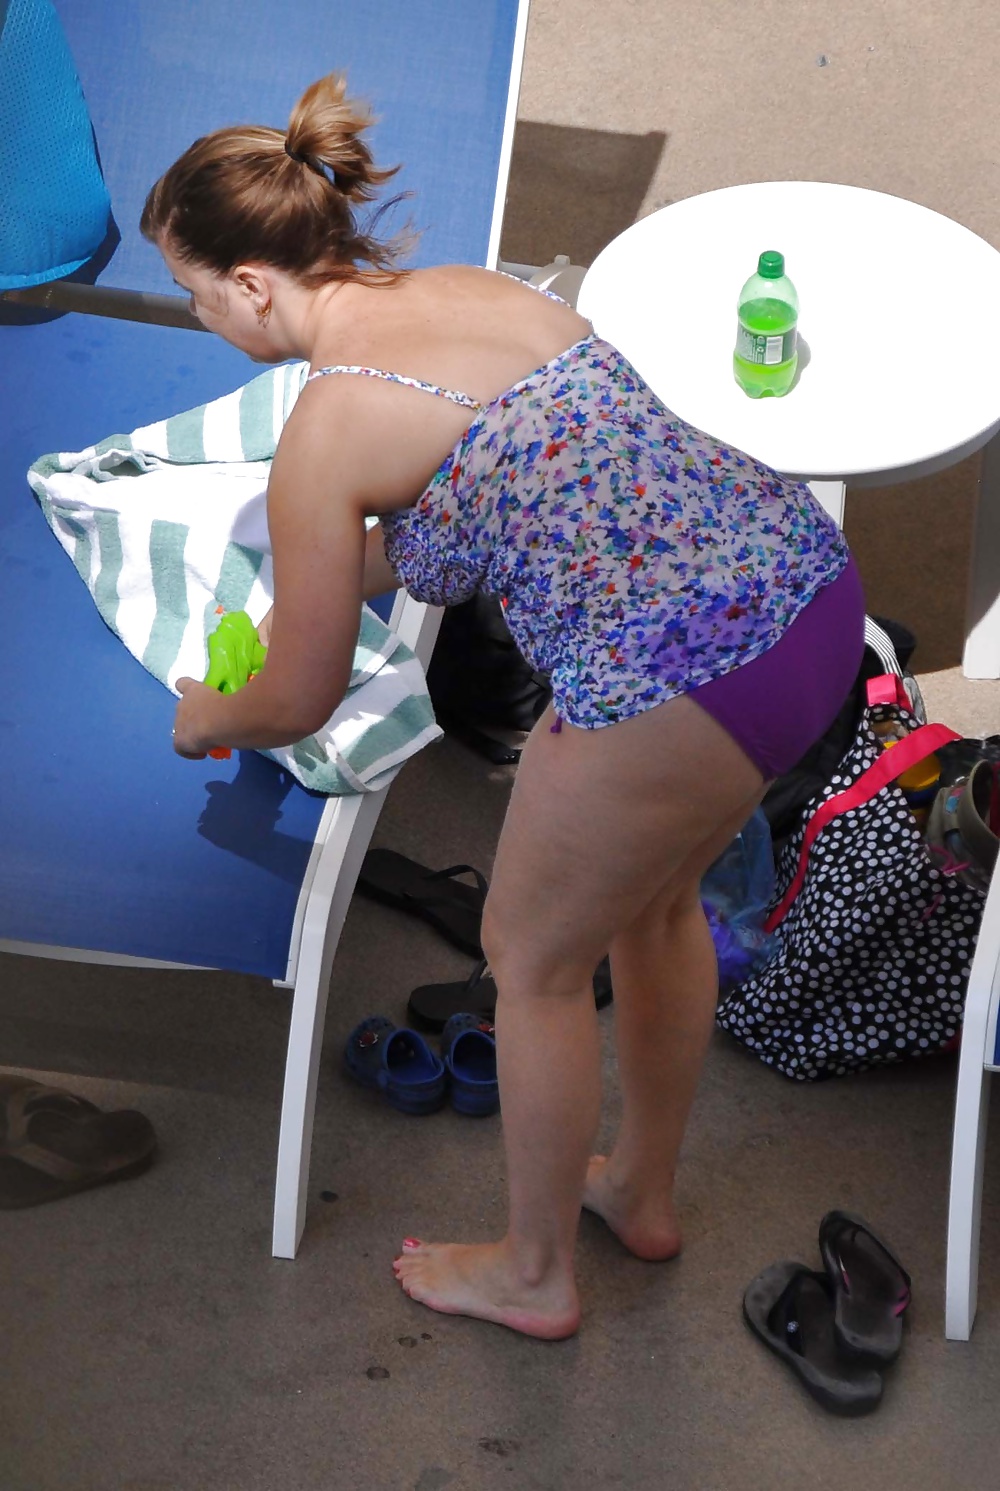 Candid MILF Mom Fat Tits Ass by Pool #39786456